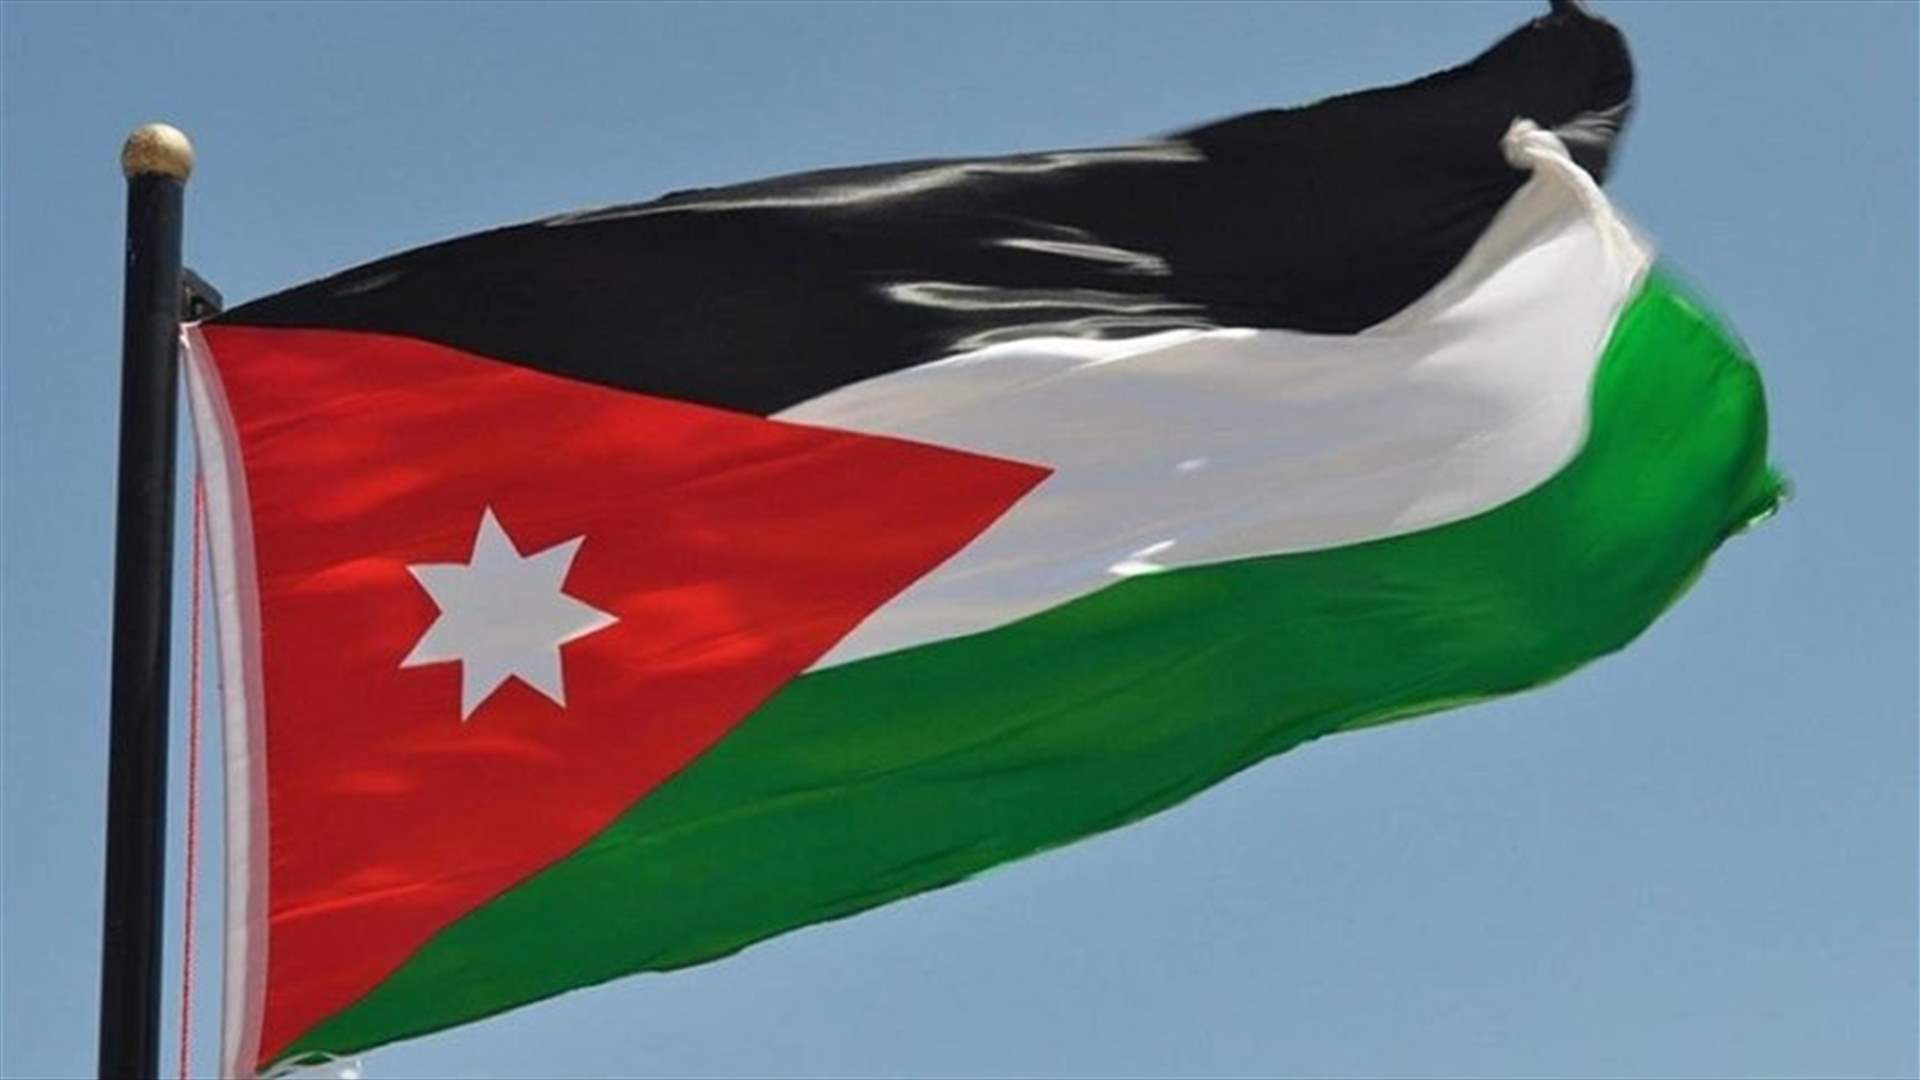 Jordan appoints new ambassador to Qatar, two years after downgrading ties